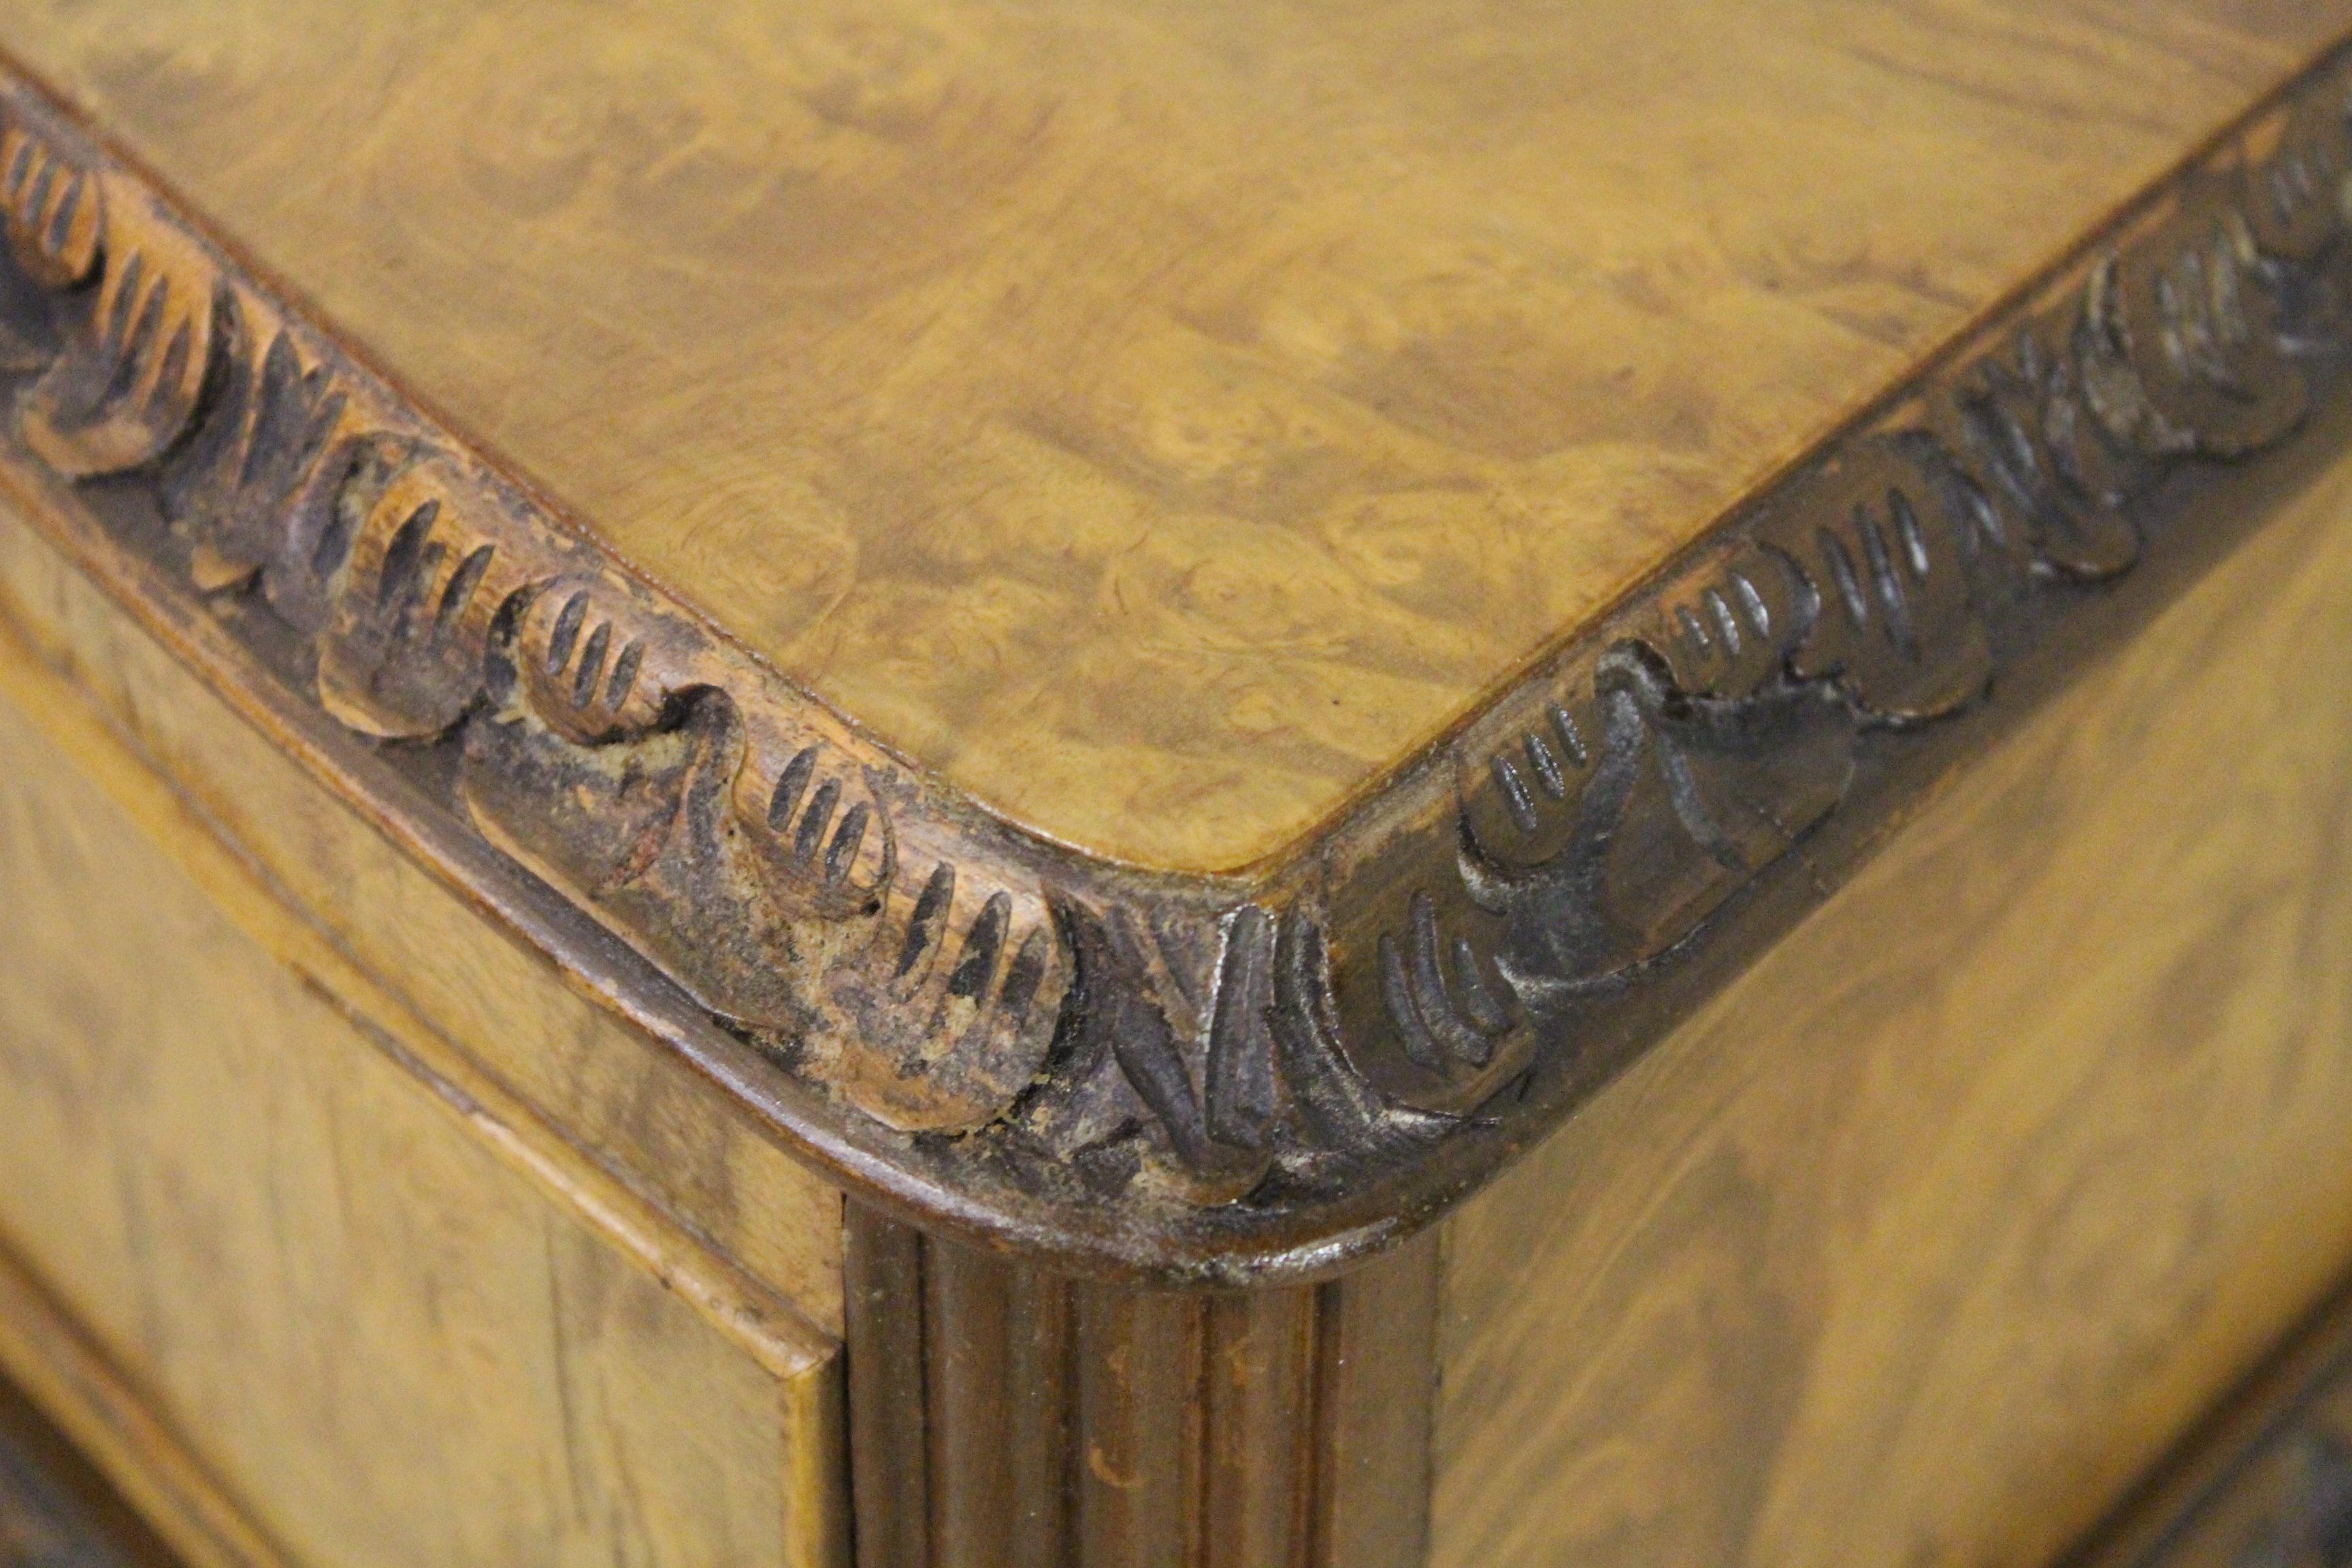 A splendid serpentine shaped side table in the Queen Anne style. Well made from solid walnut with attractive burr walnut veneers. The serpentine shaped top is decorated with a carved border to the edge. Further carved decoration is found to the